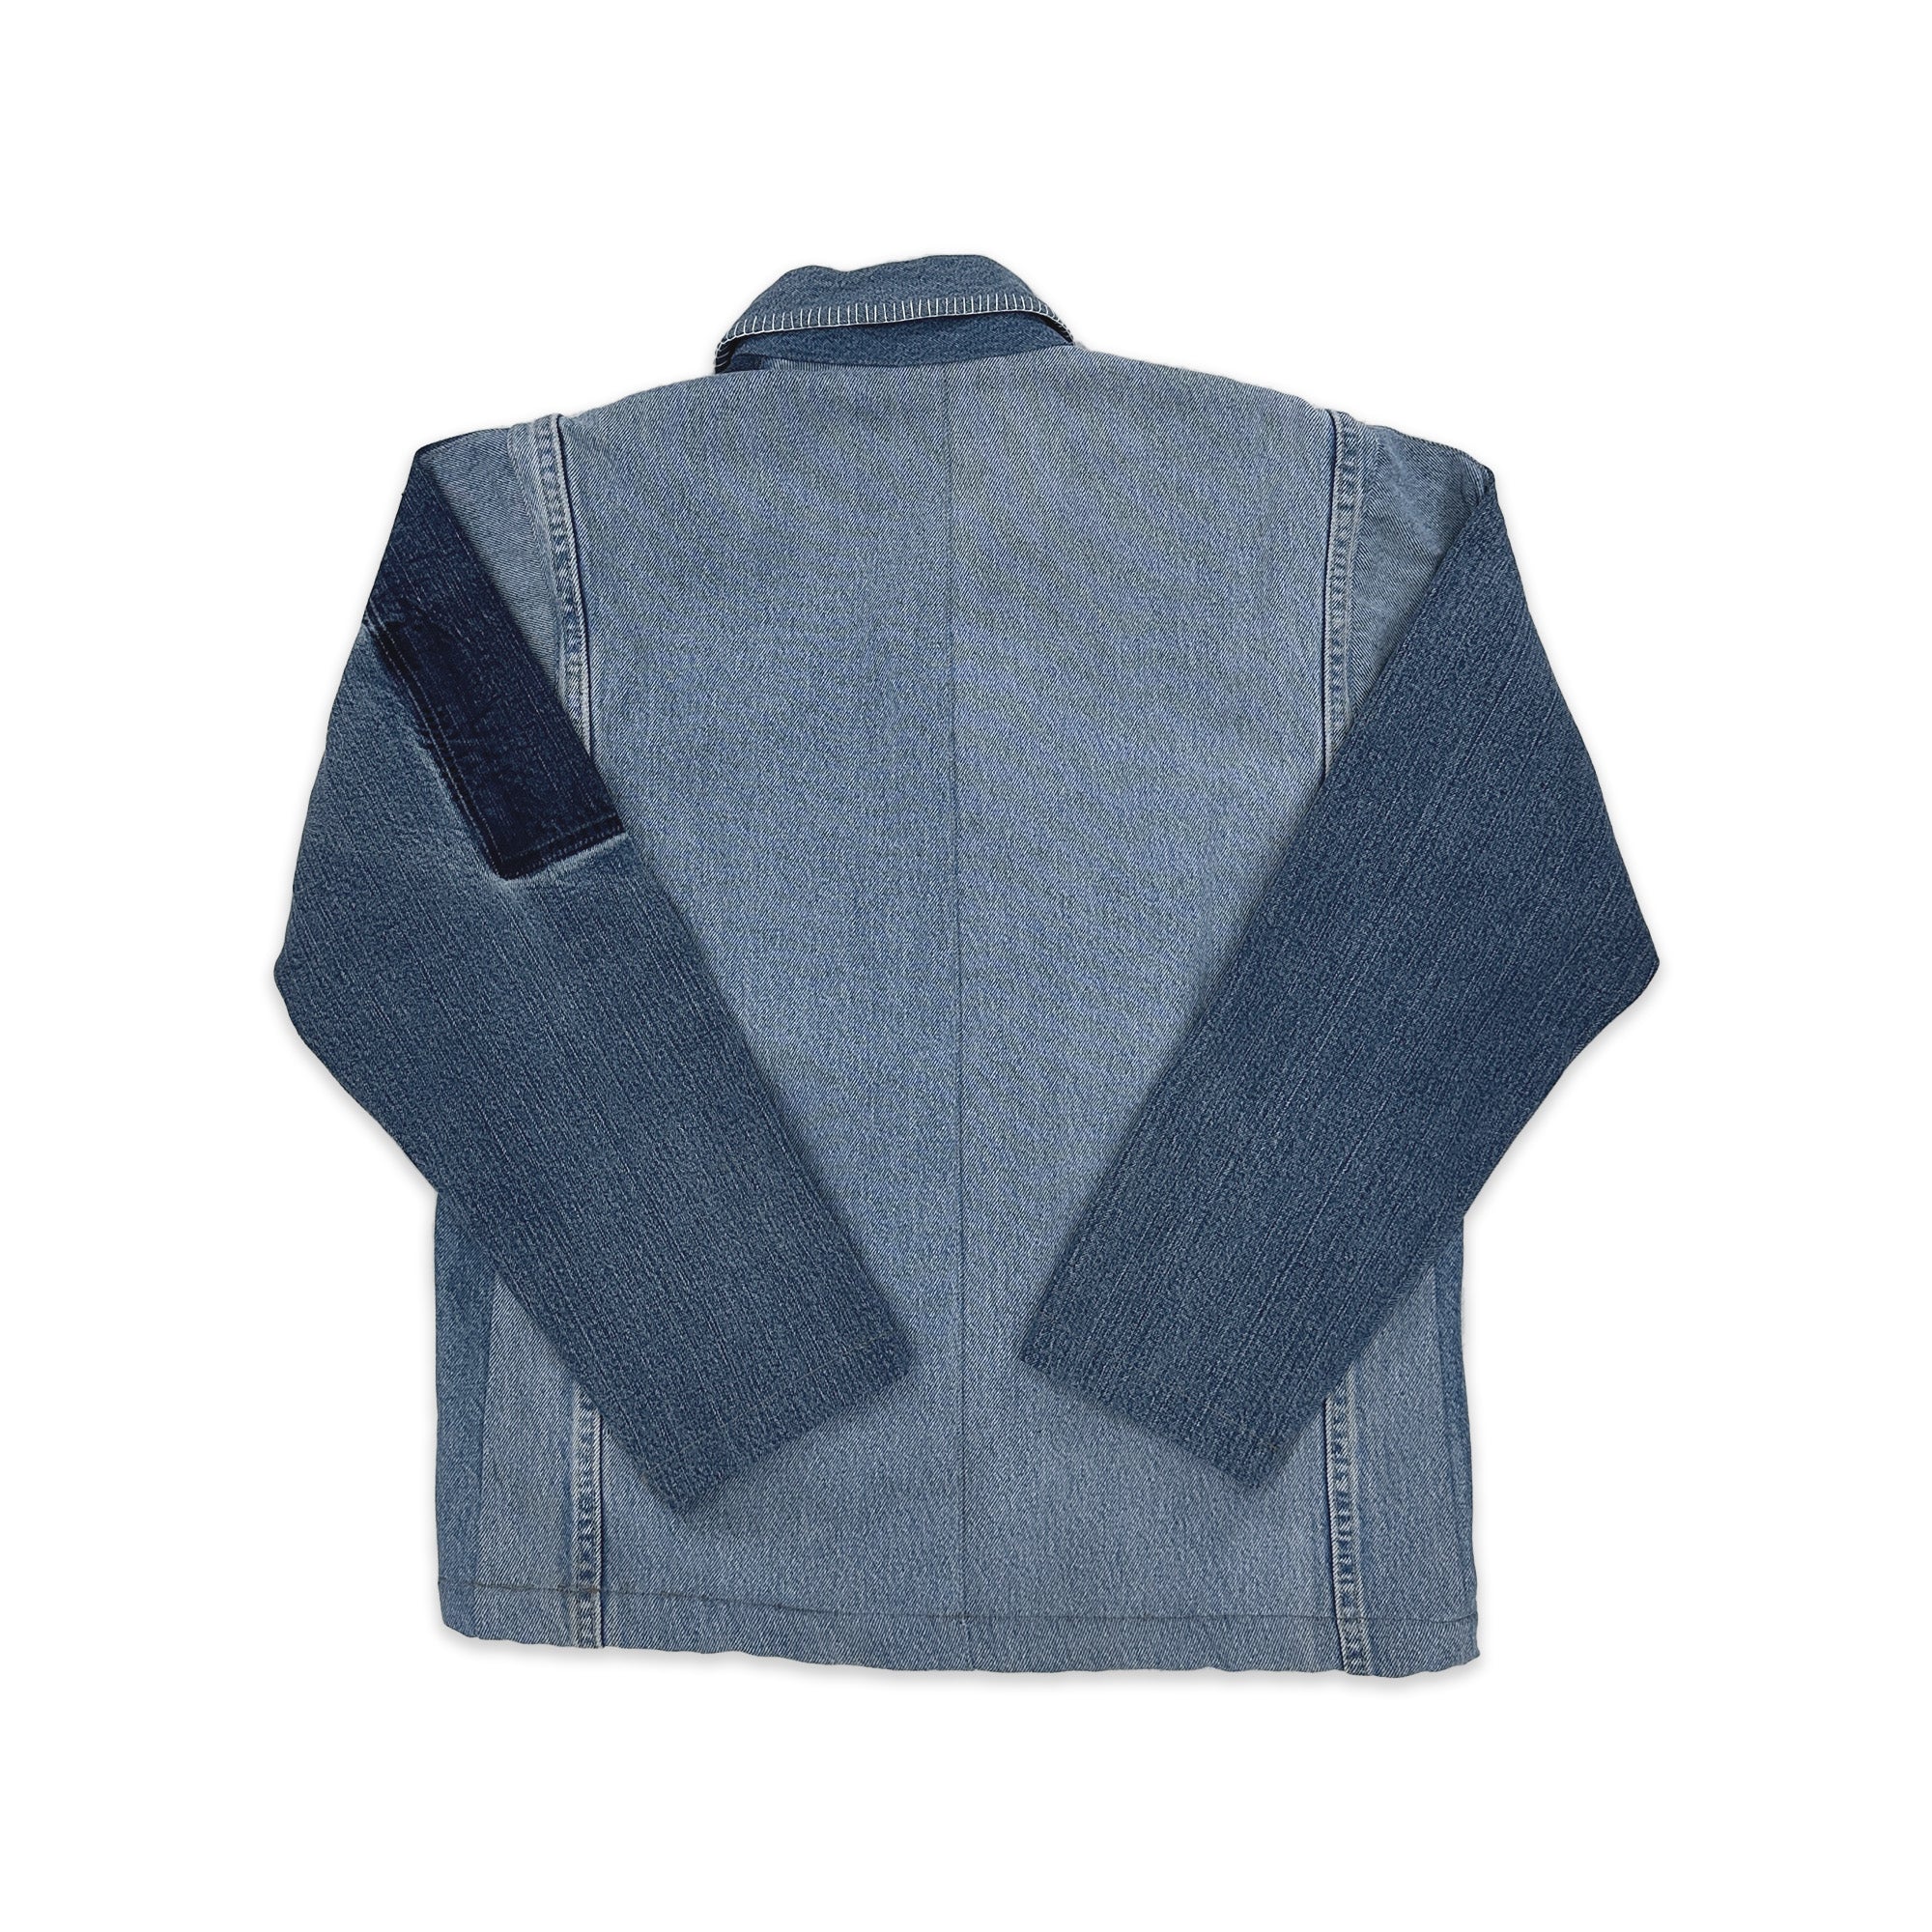 Chore Coat Made From Upcycled Work Jeans - Blanket Stitching - Medium Great Lakes Reclaimed Denim